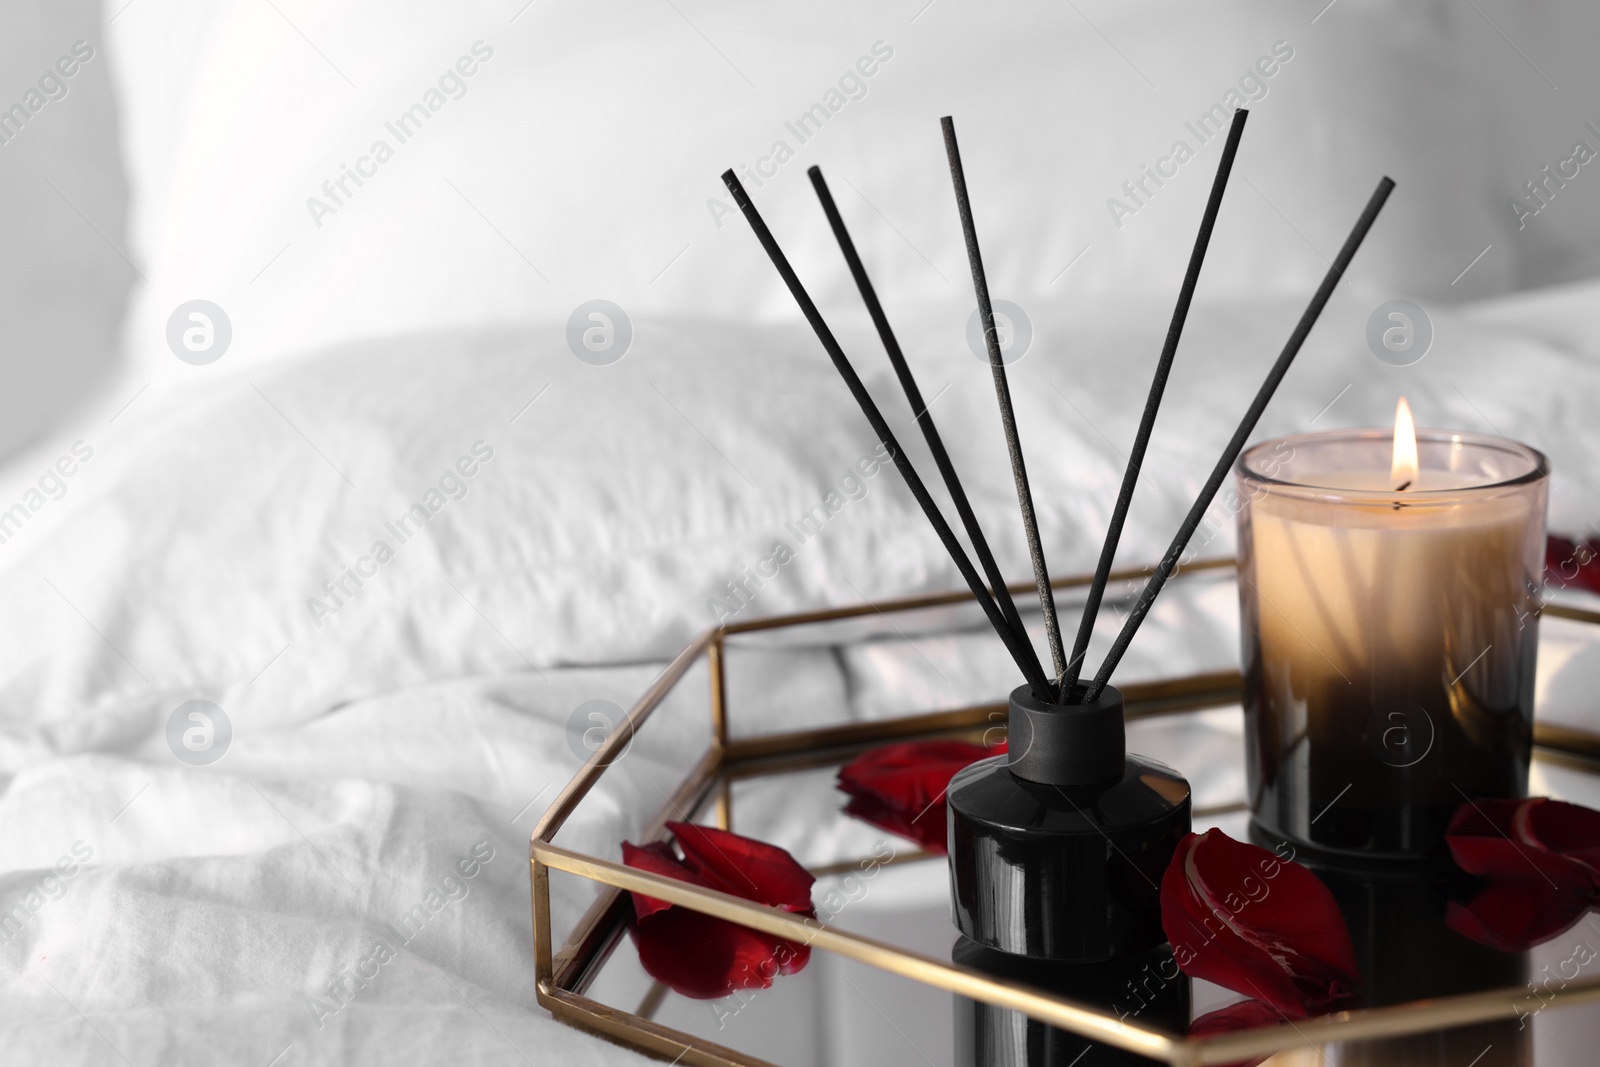 Photo of Aromatic reed air freshener, red petals and candle on bed, space for text